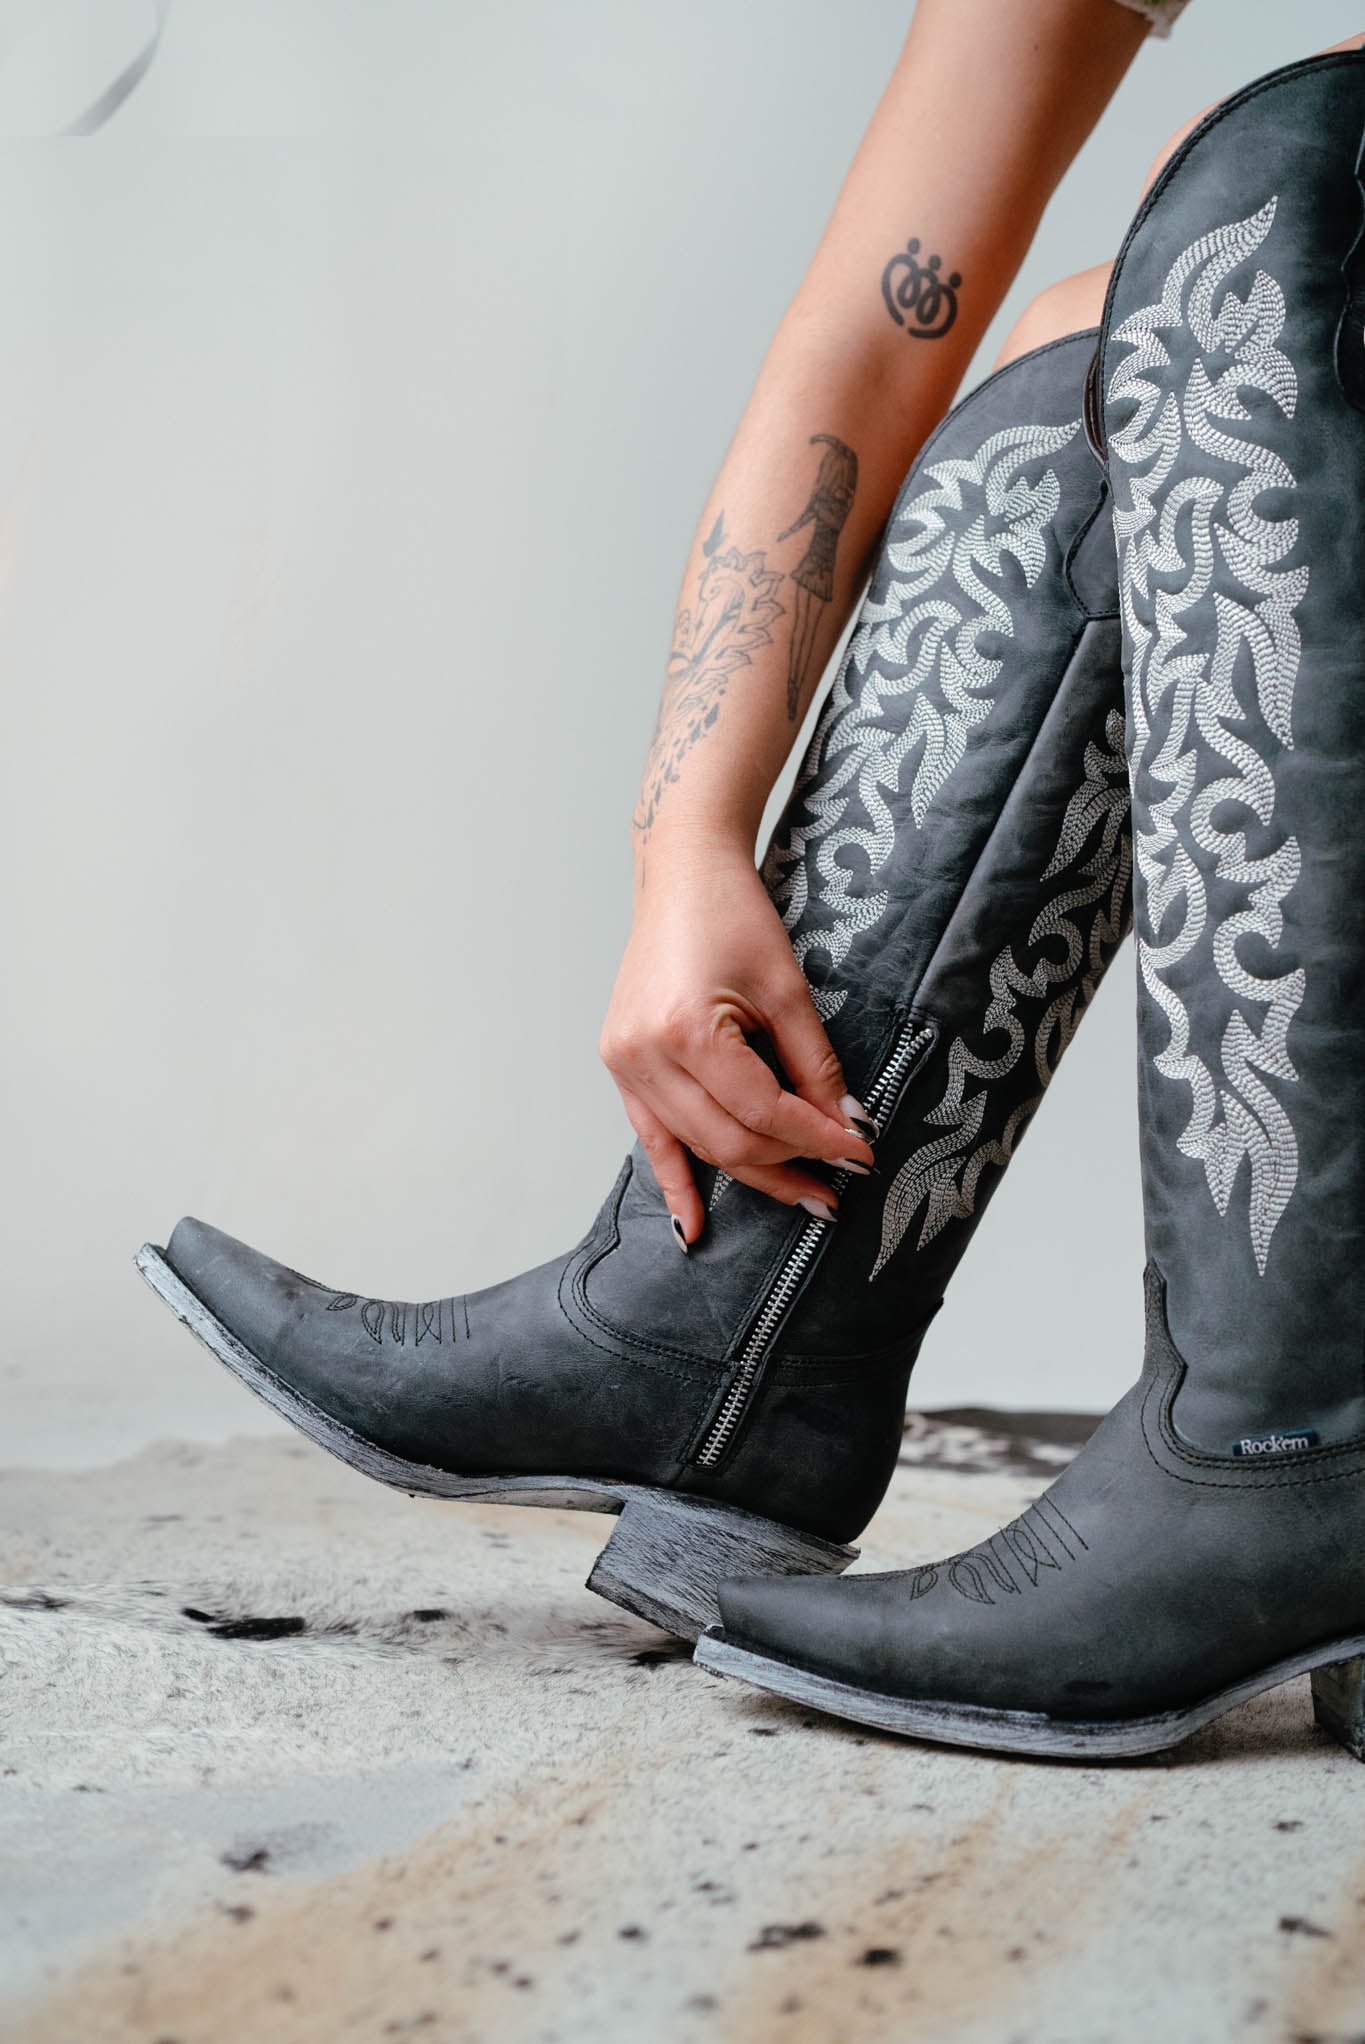 Est. Adela Snip Toe Tall Cowgirl Boot